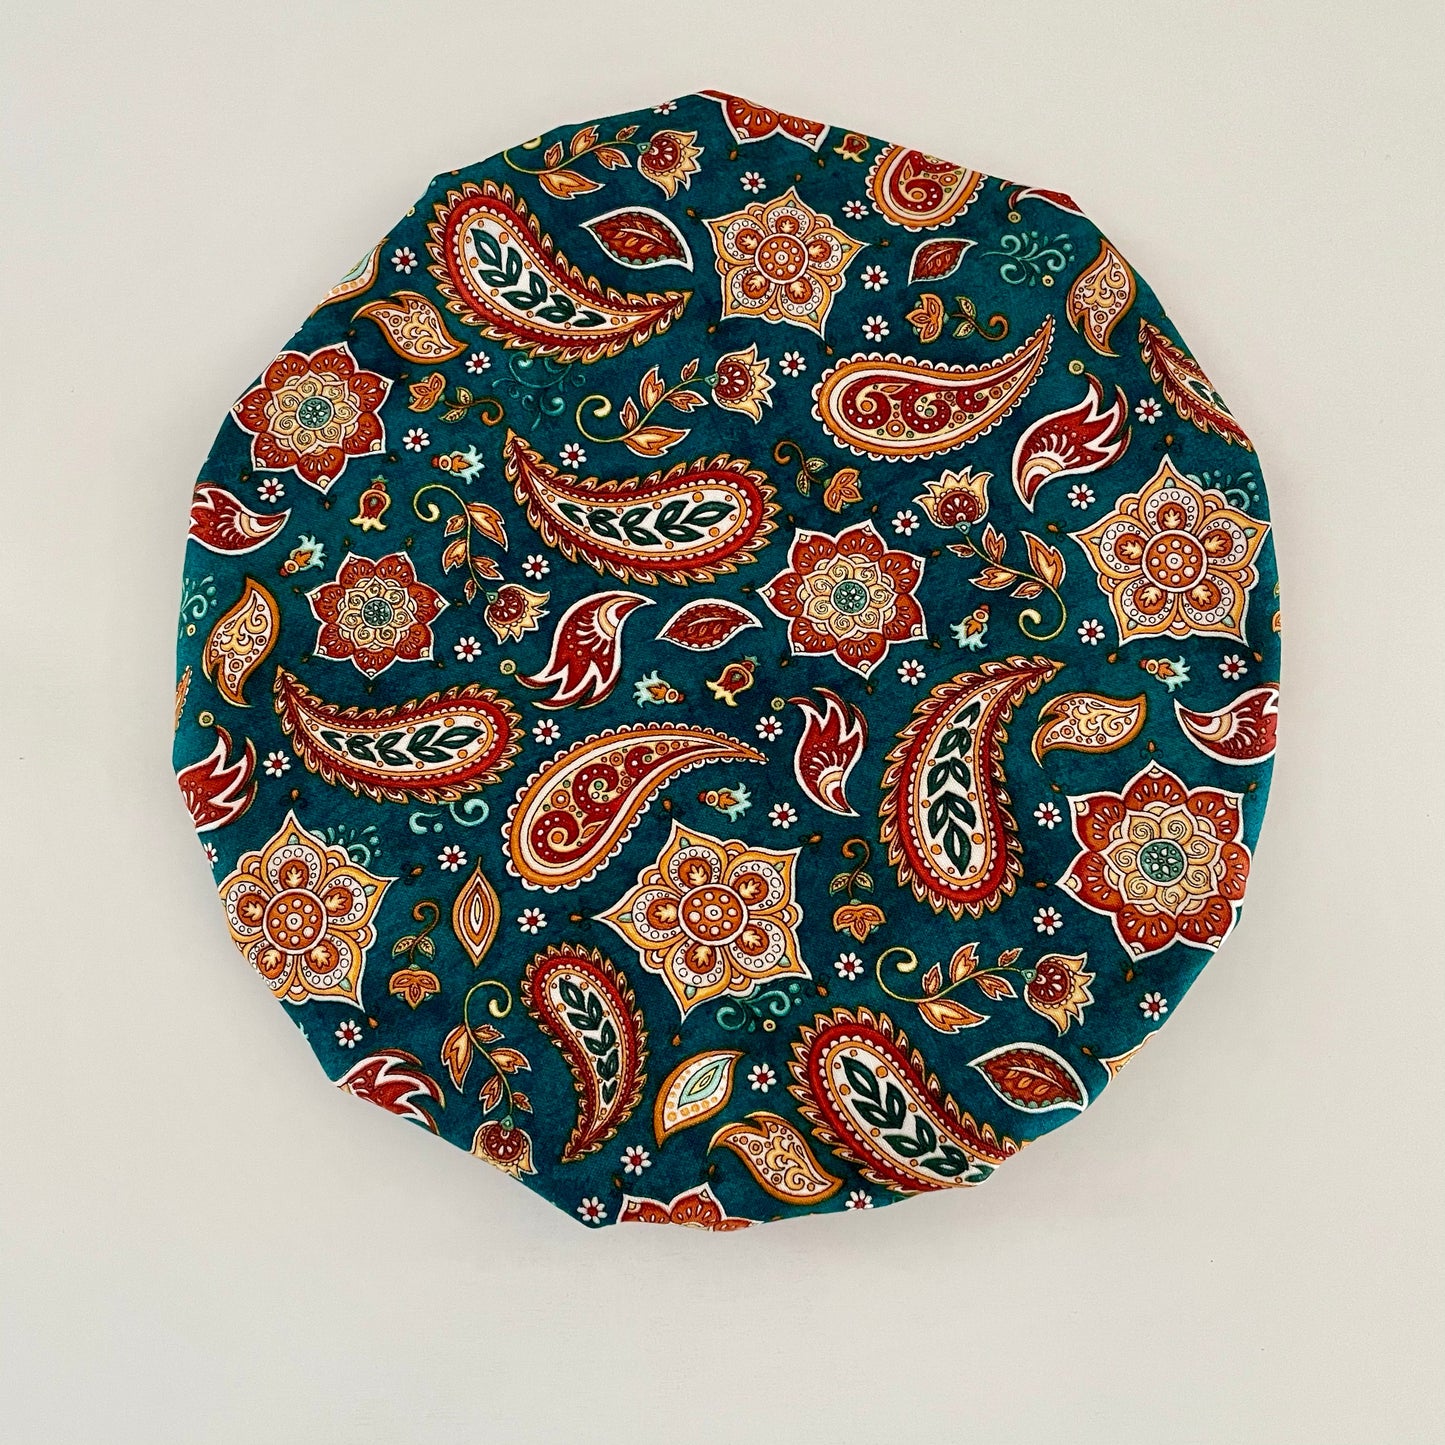 Stand Mixer Bowl Covers - Forest Green Paisley